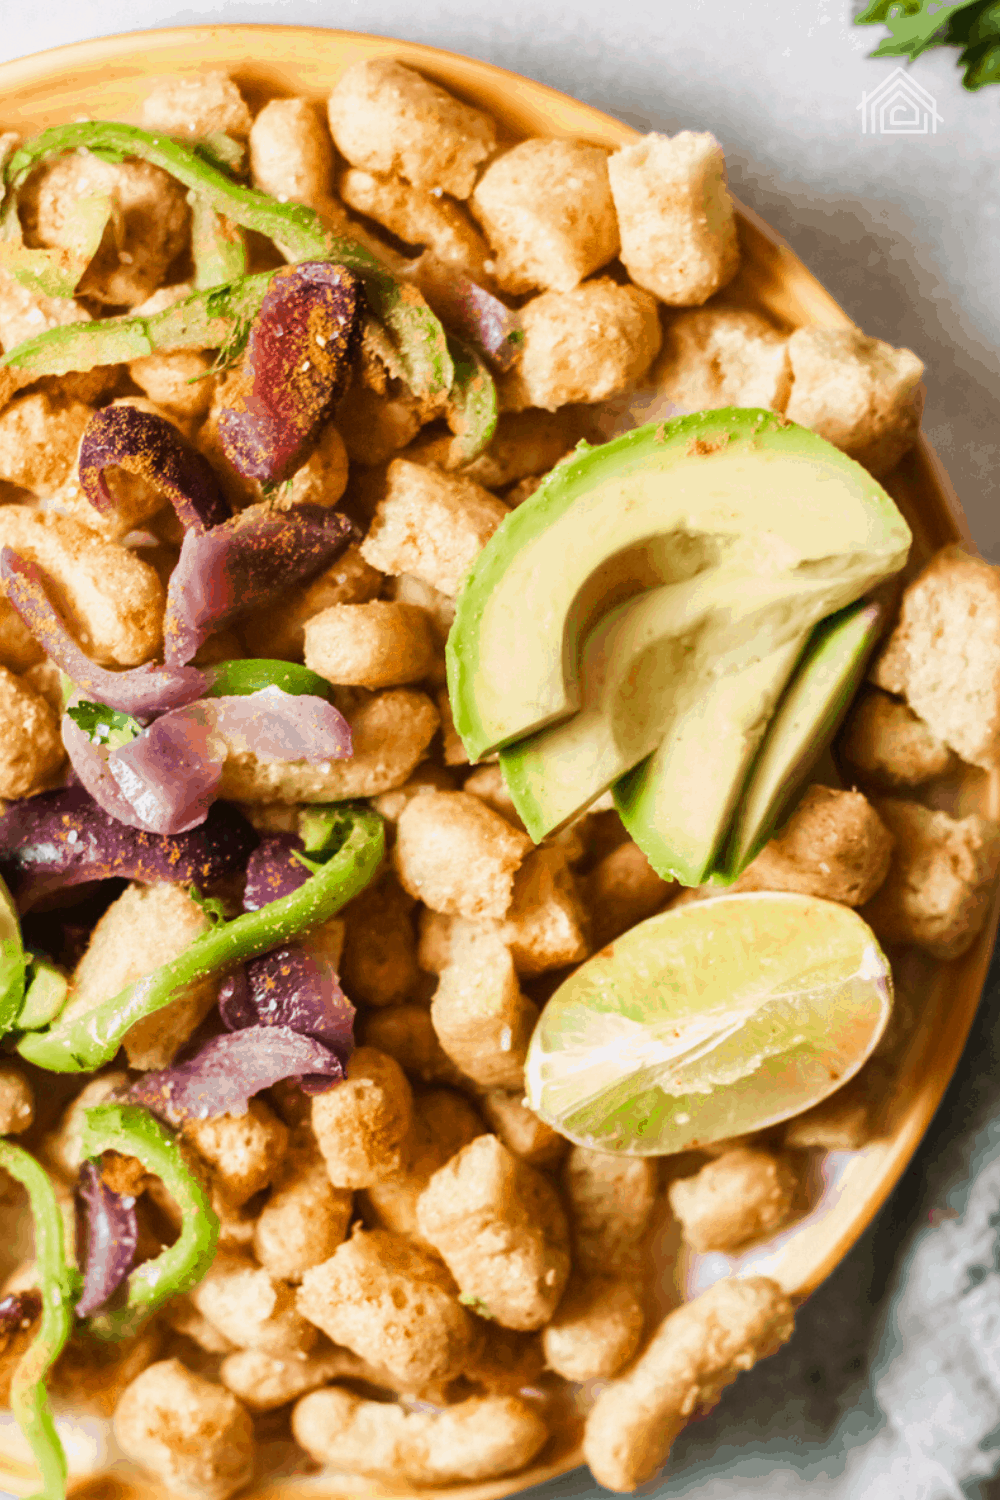 With herbs, spices, and avocado, in Keto Pork rind Nachos, you can continue enjoying your healthy snack while on the very low-carb keto diet. via @mystayathome